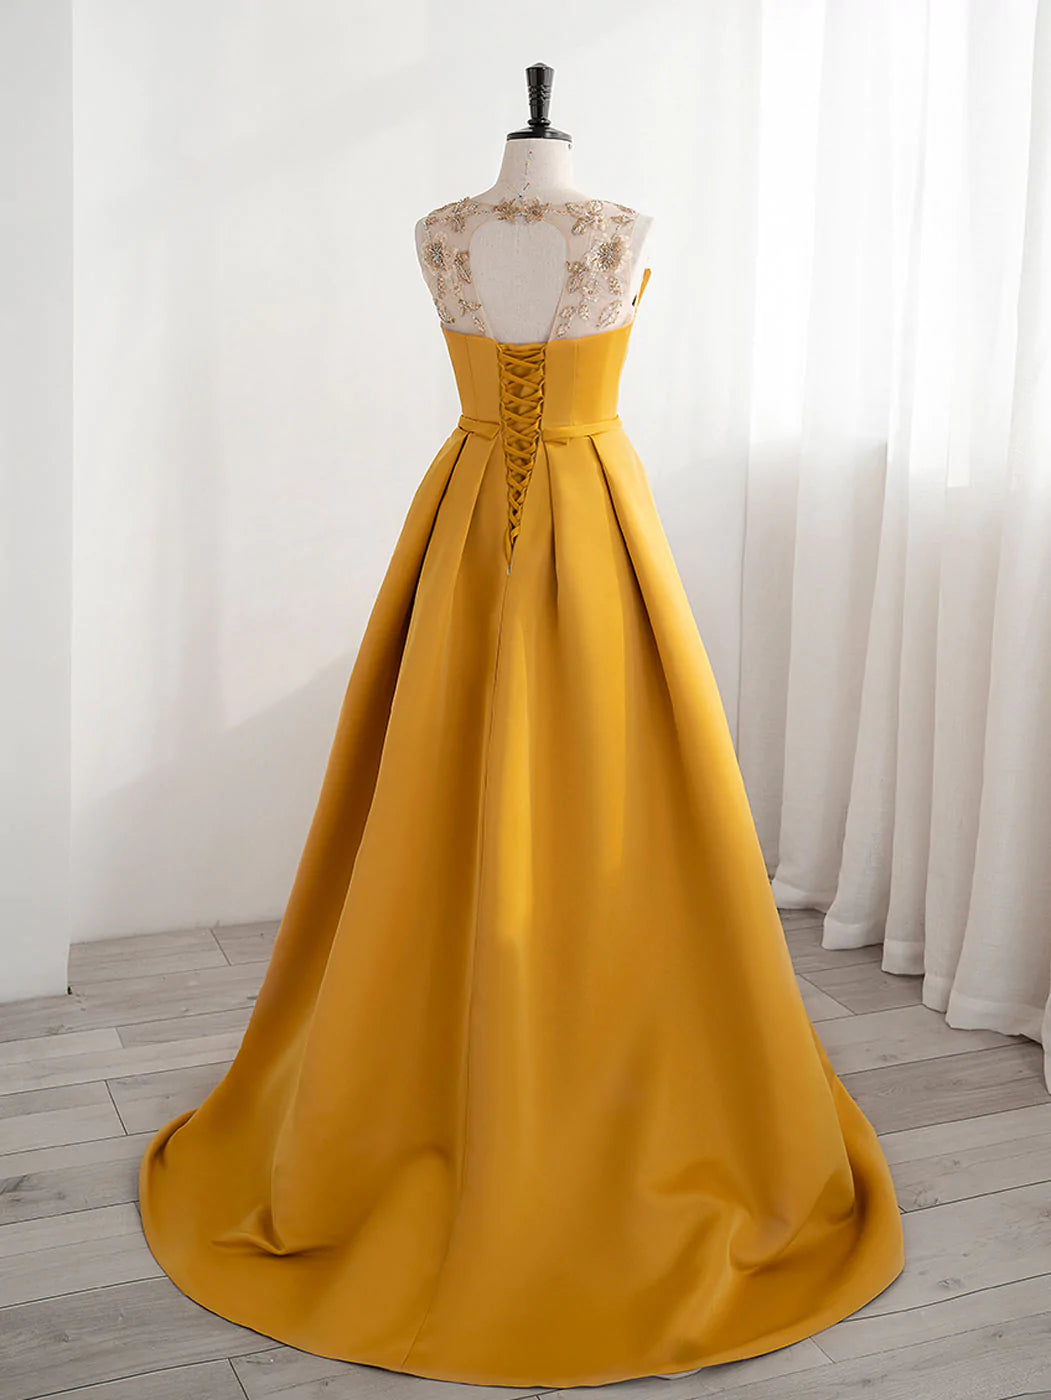 Party Dress A Line, Yellow Satin Beaded Long Prom Dress with Leg Slit, Yellow A-line Party Dress